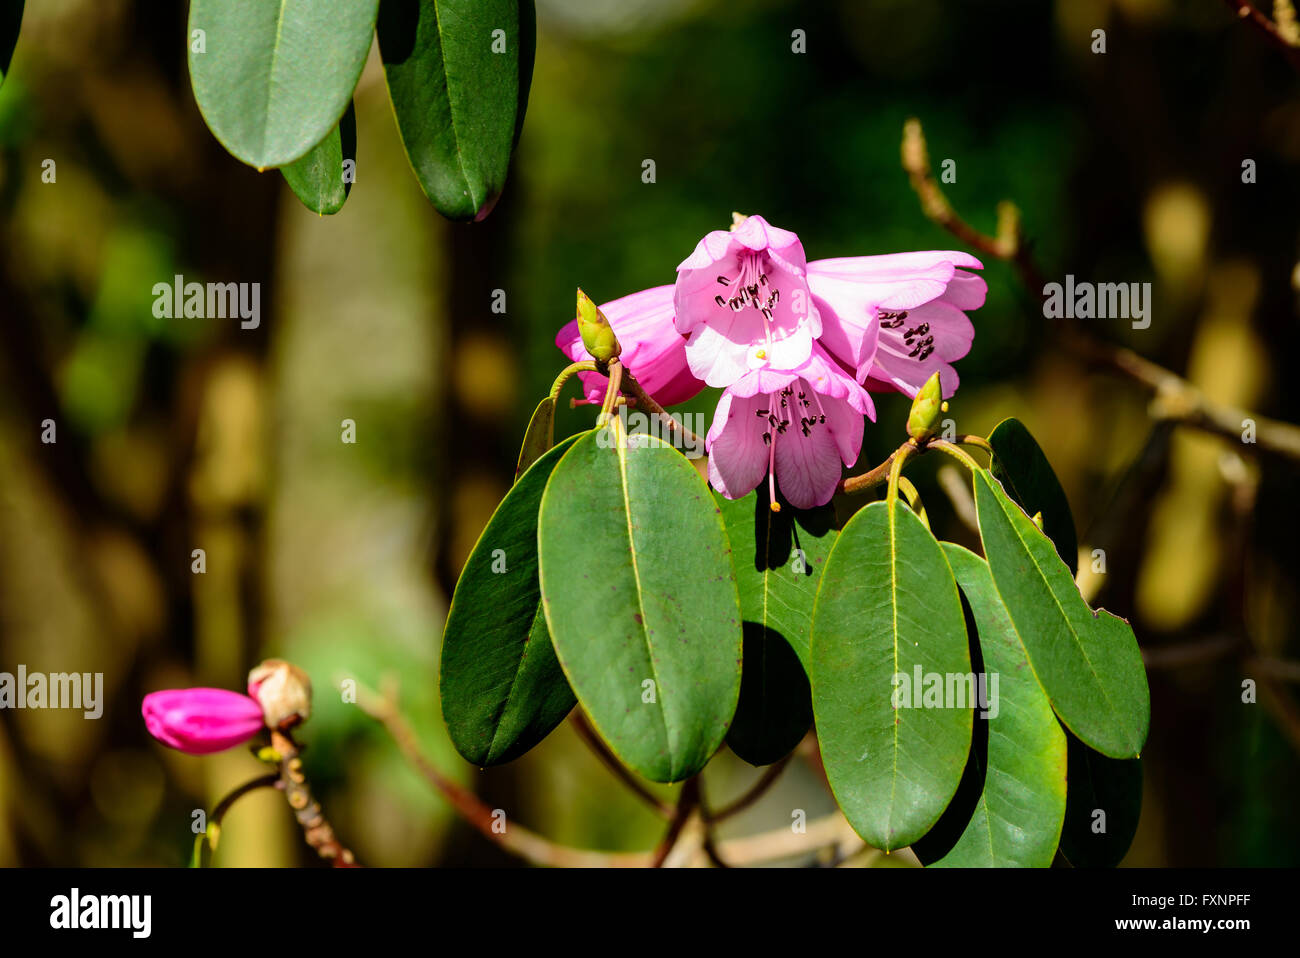 Lovely pink purple rhododendron flower in early spring. Stock Photo